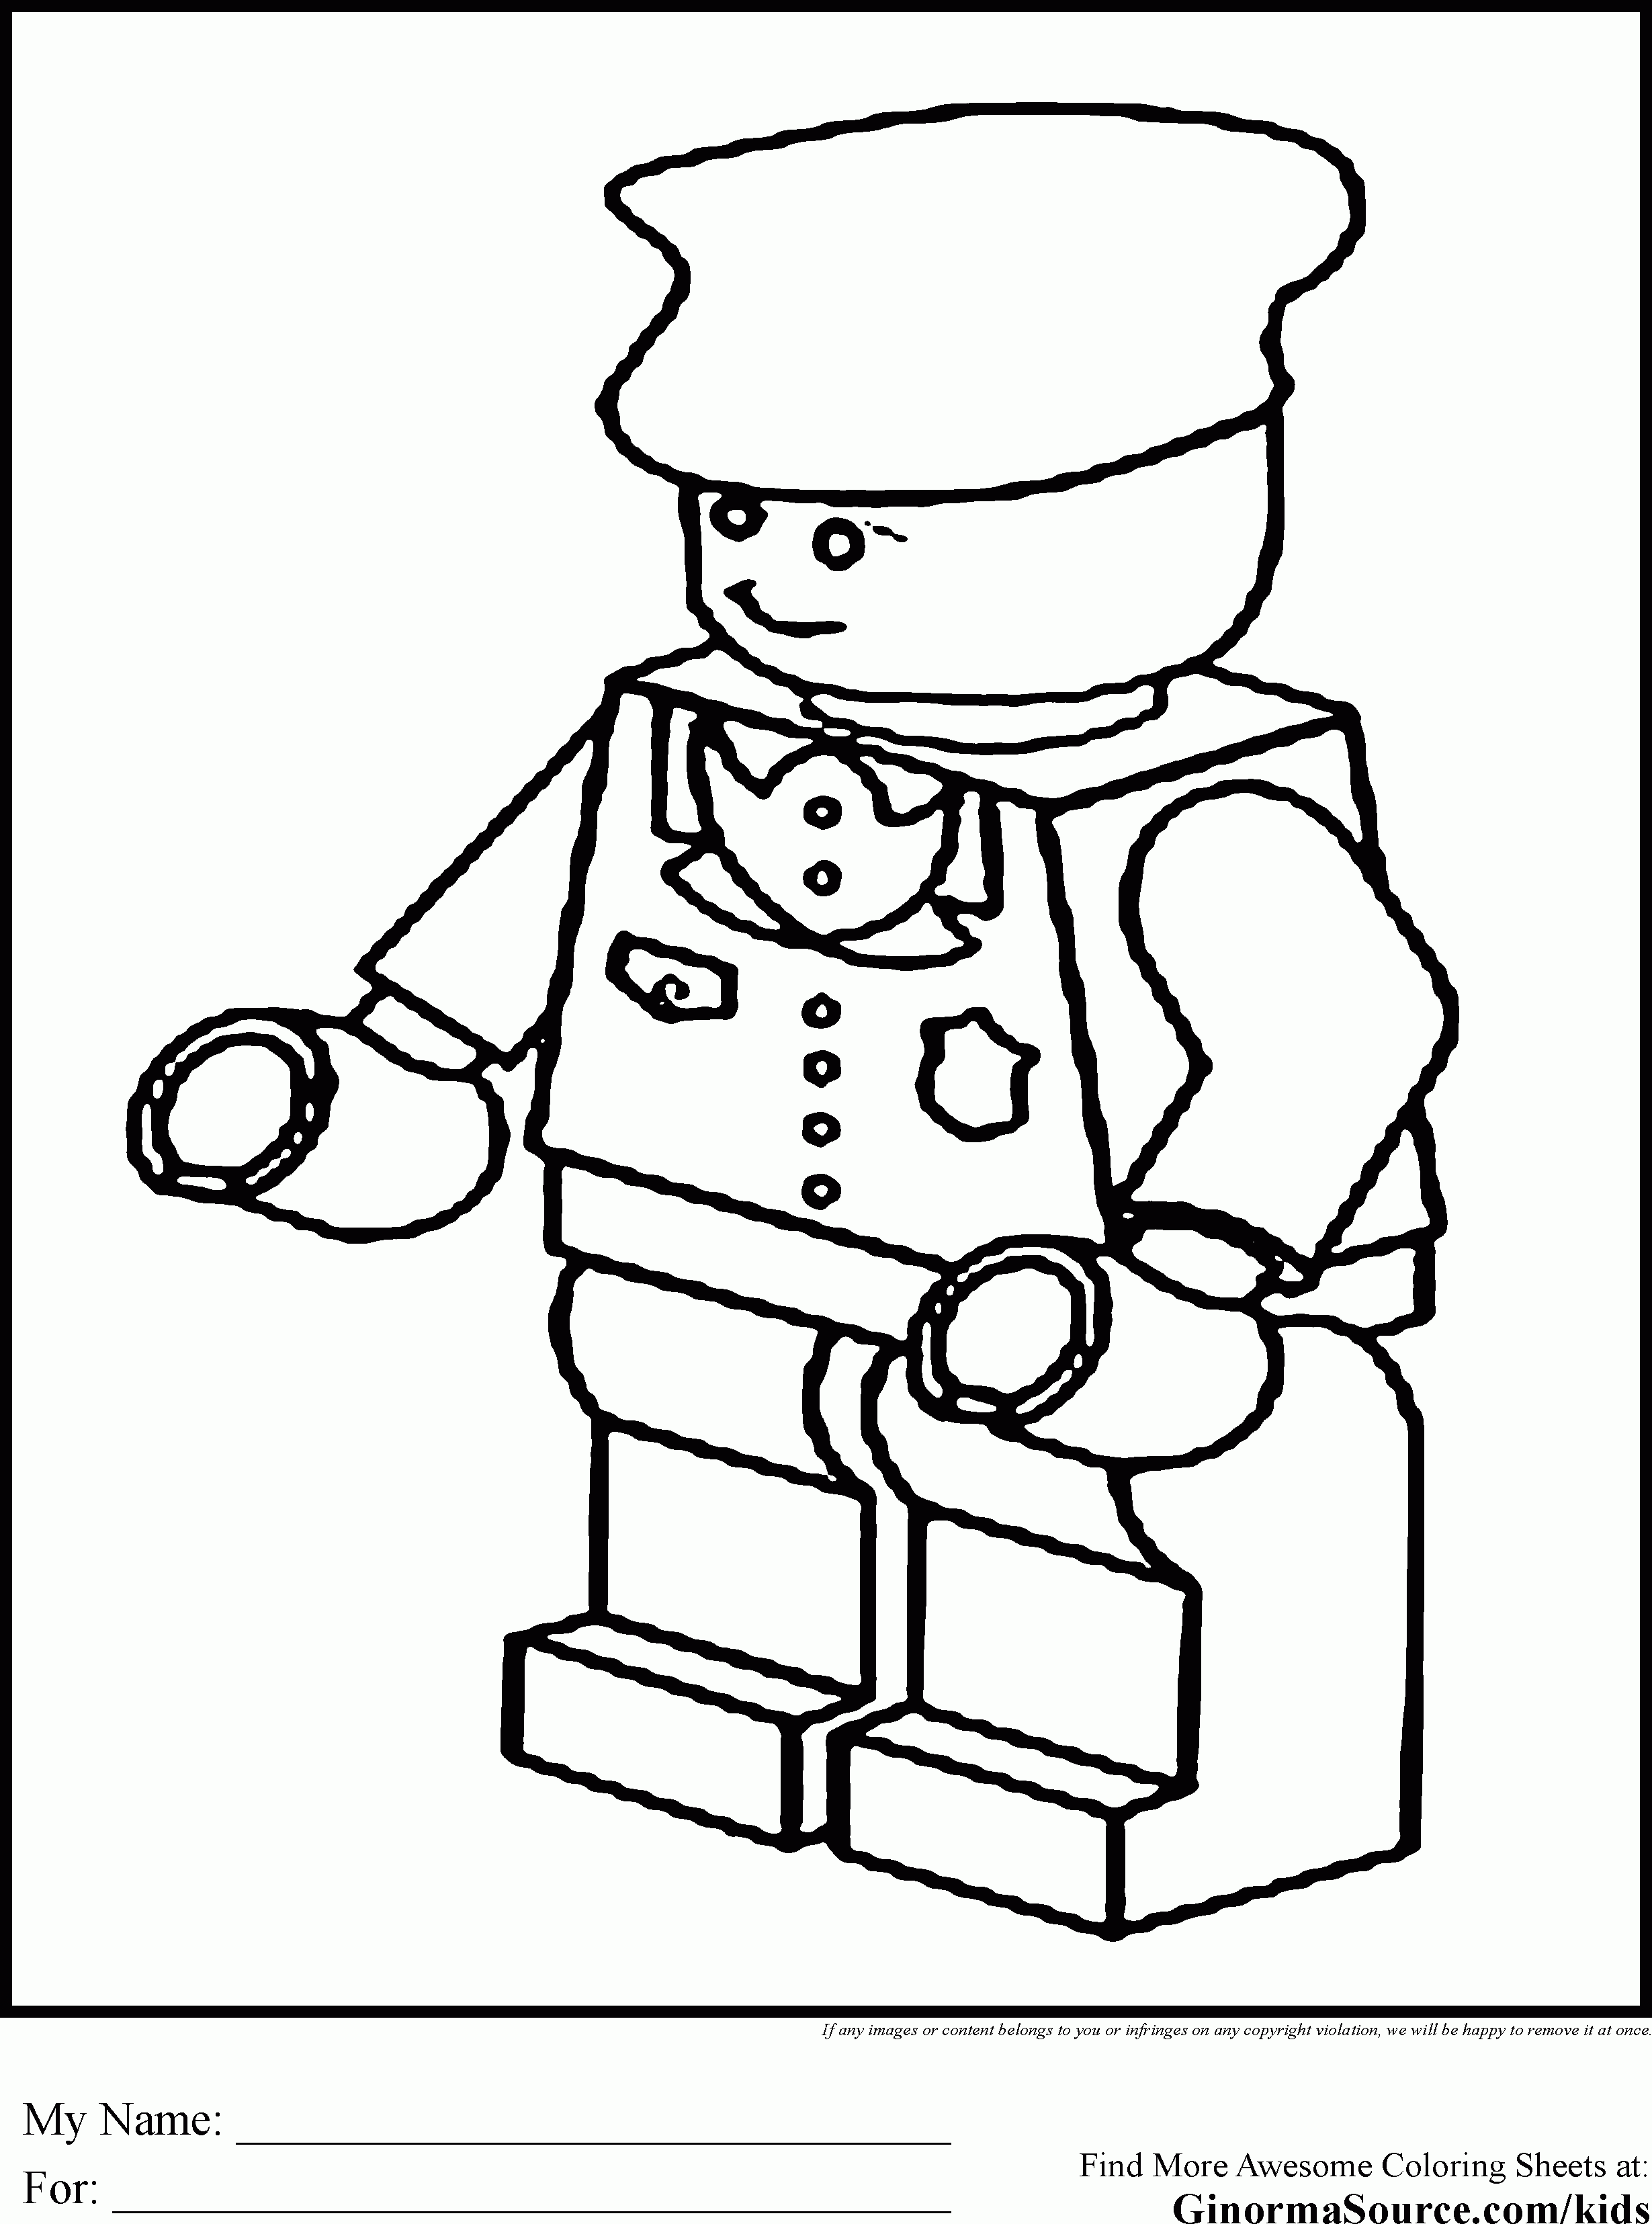 Intellect Lego Moto Police Coloring Page Free Printable Coloring ...